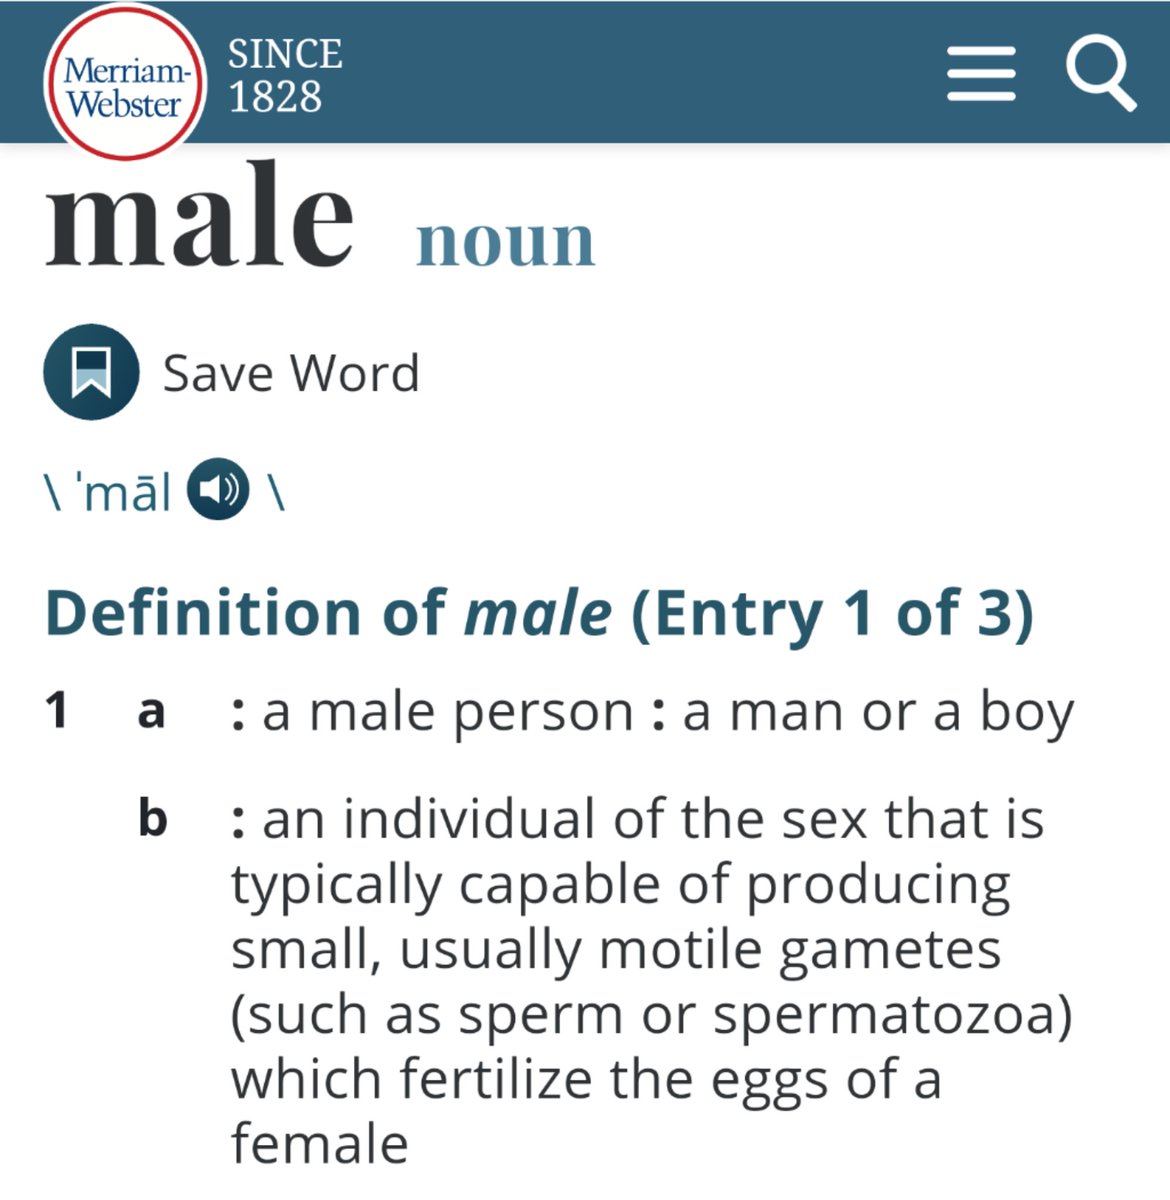 𝘸𝘩𝘪𝘤𝘩 𝘧𝘦𝘳𝘵𝘪𝘭𝘪𝘻𝘦 𝘵𝘩𝘦 𝙚𝙜𝙜𝙨 𝘰𝘧 𝘢 𝙛𝙚𝙢𝙖𝙡𝙚The primary definition of male (applies not just to our species) is this one. (b)About 𝙨𝙚𝙭, 𝙜𝙖𝙢𝙚𝙩𝙚𝙨 and 𝙨𝙥𝙚𝙧𝙢.